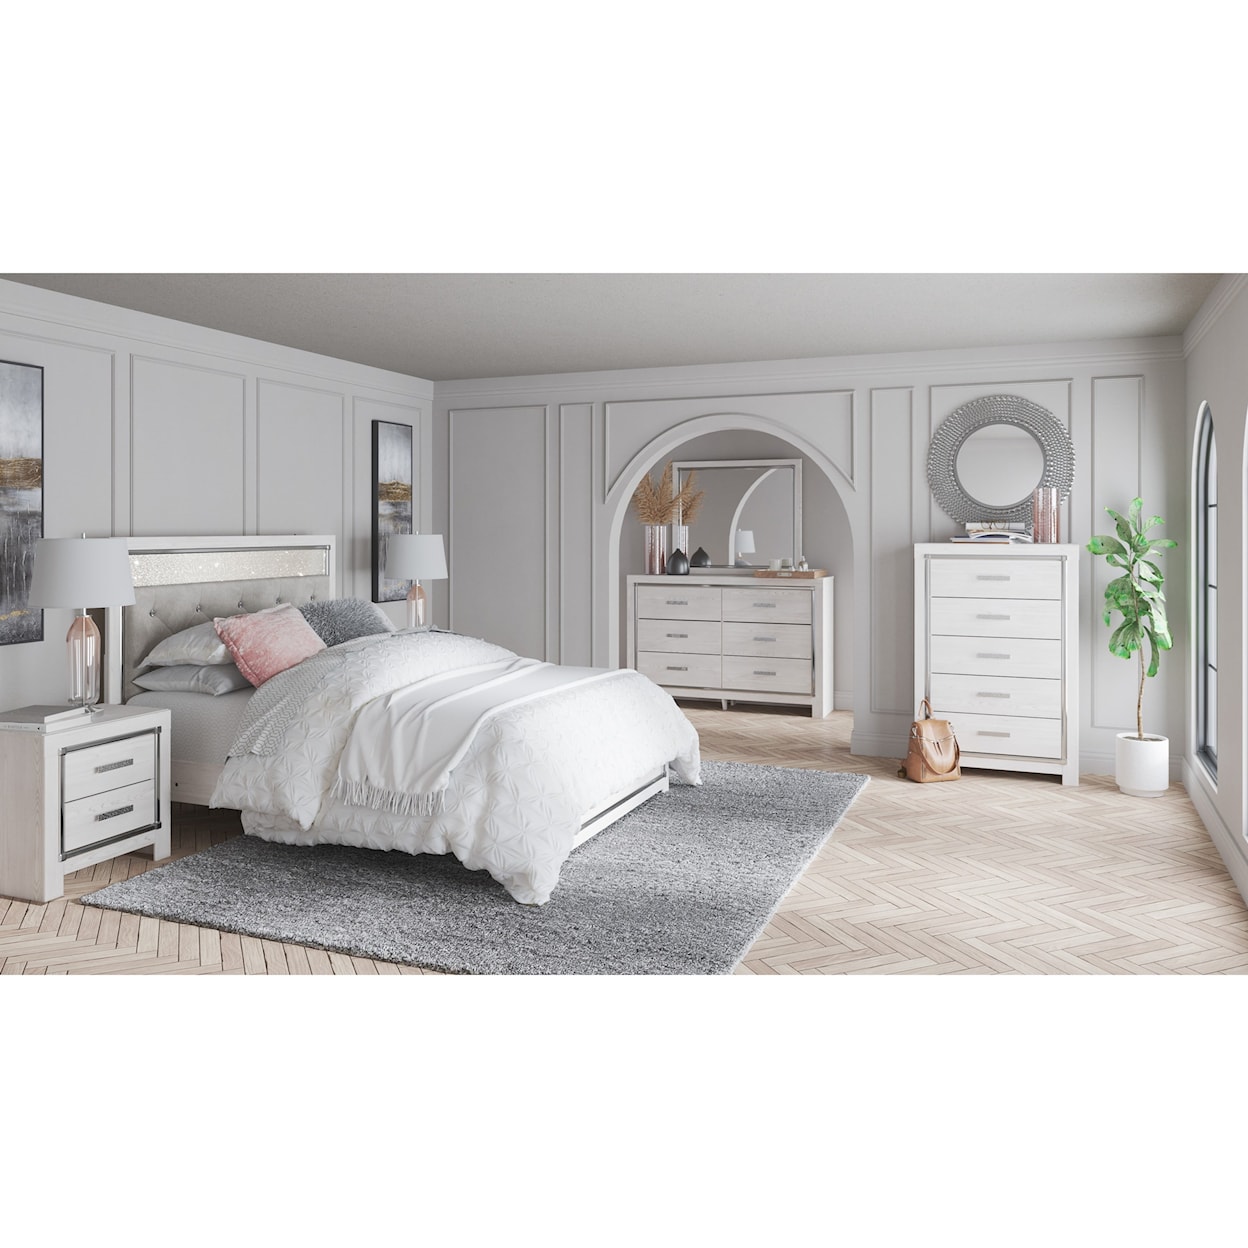 Benchcraft Altyra Twin Bedroom Group